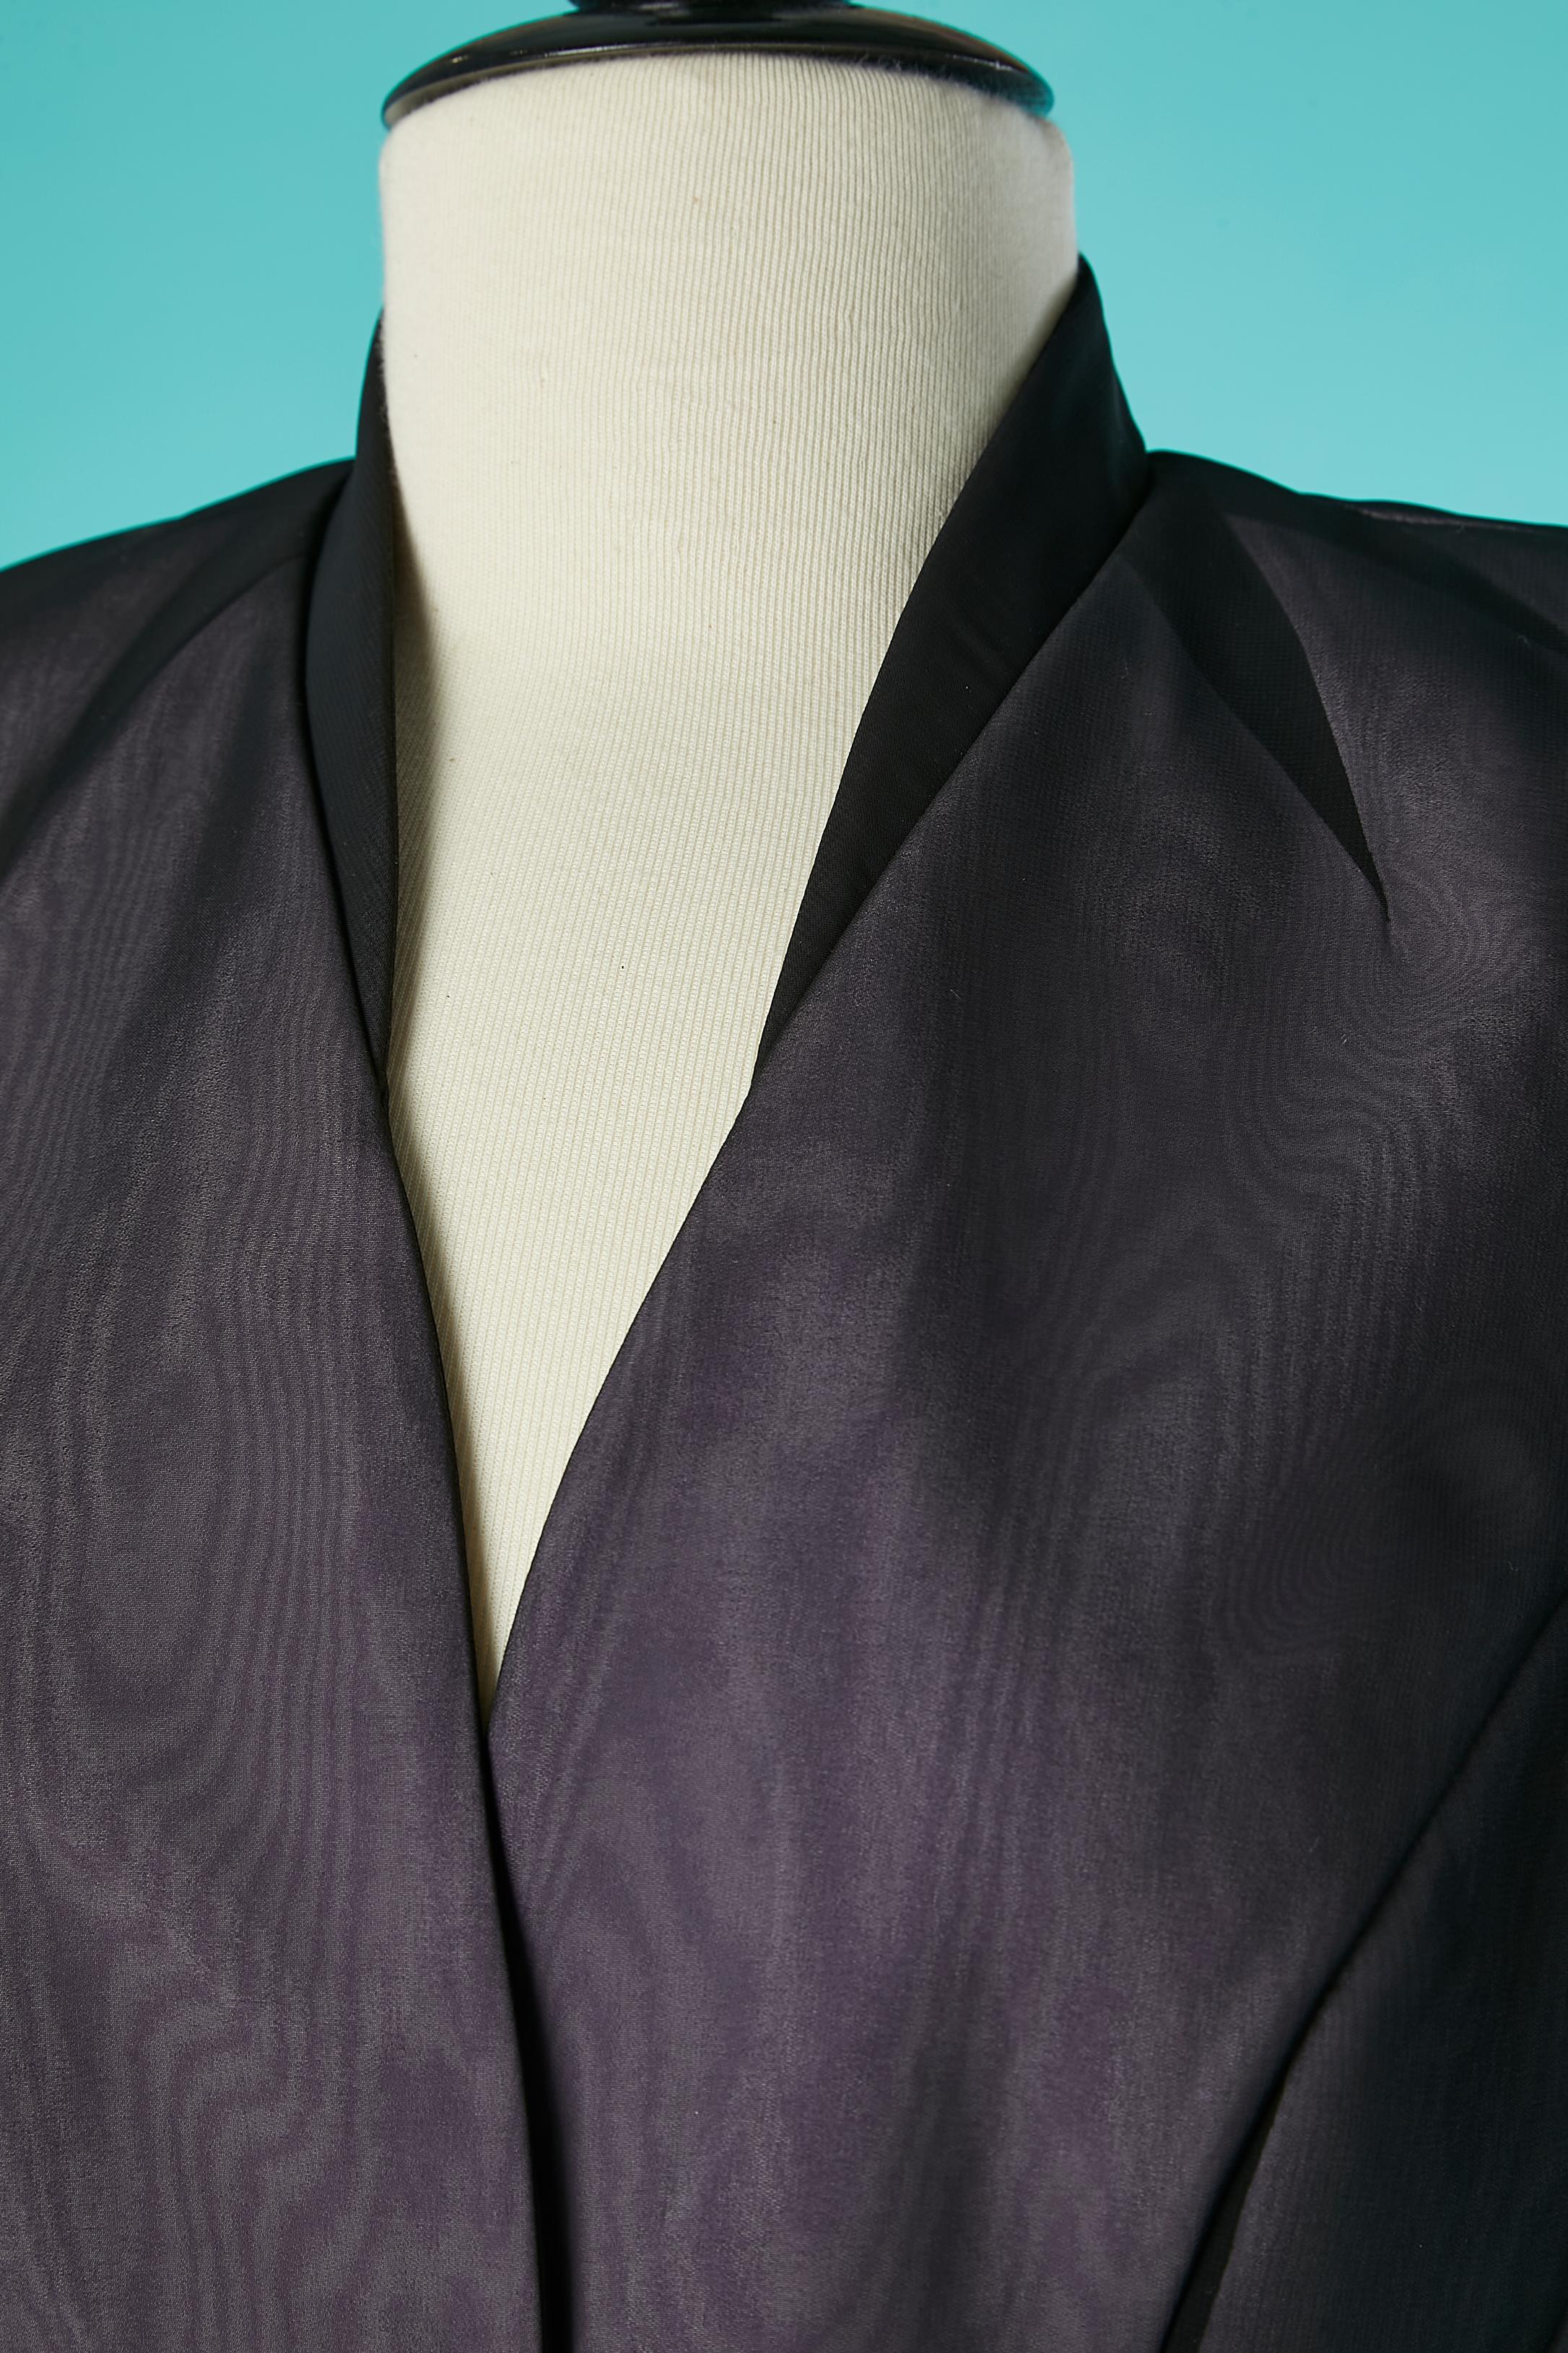 Skirt suit made of double lays of fabric and cut-work. The underlay is a lilac polyester fabric and the top lay is a black polyester chiffon. No information for the composition of the lining but probably acetate or rayon. Cut-work around the